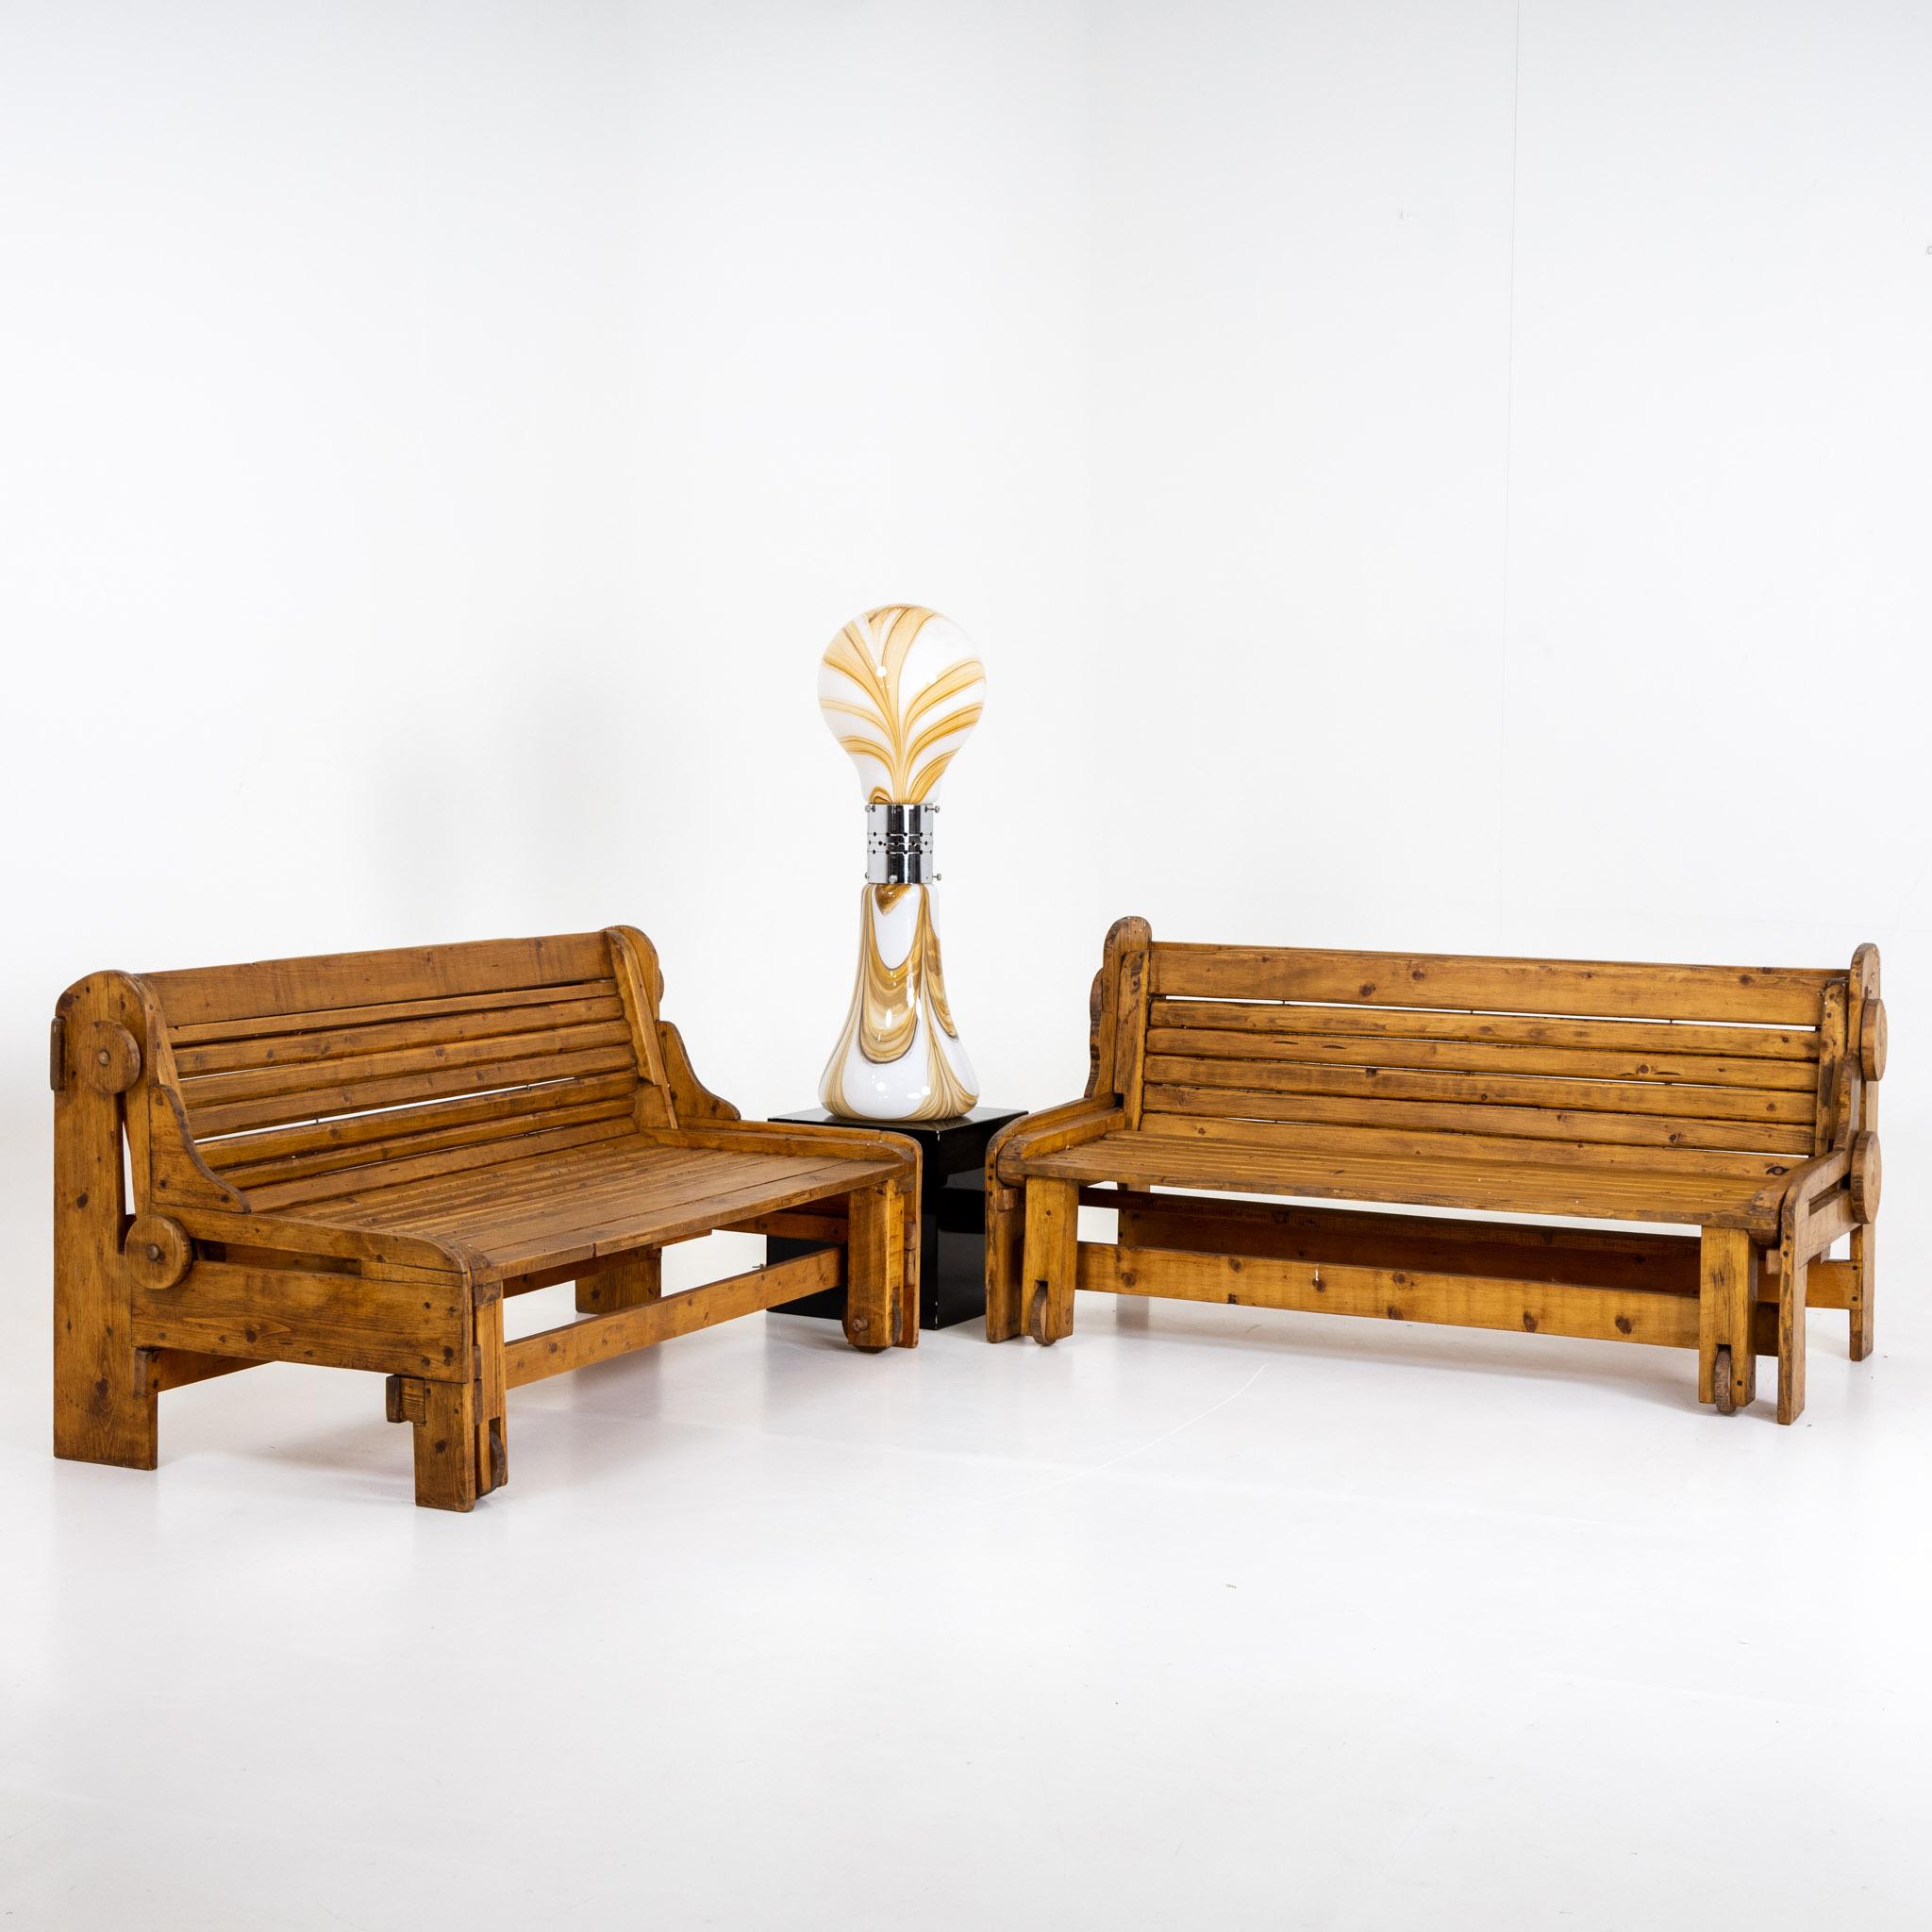 Beech Pair of Benches, Italian Manufactory, 1960s For Sale